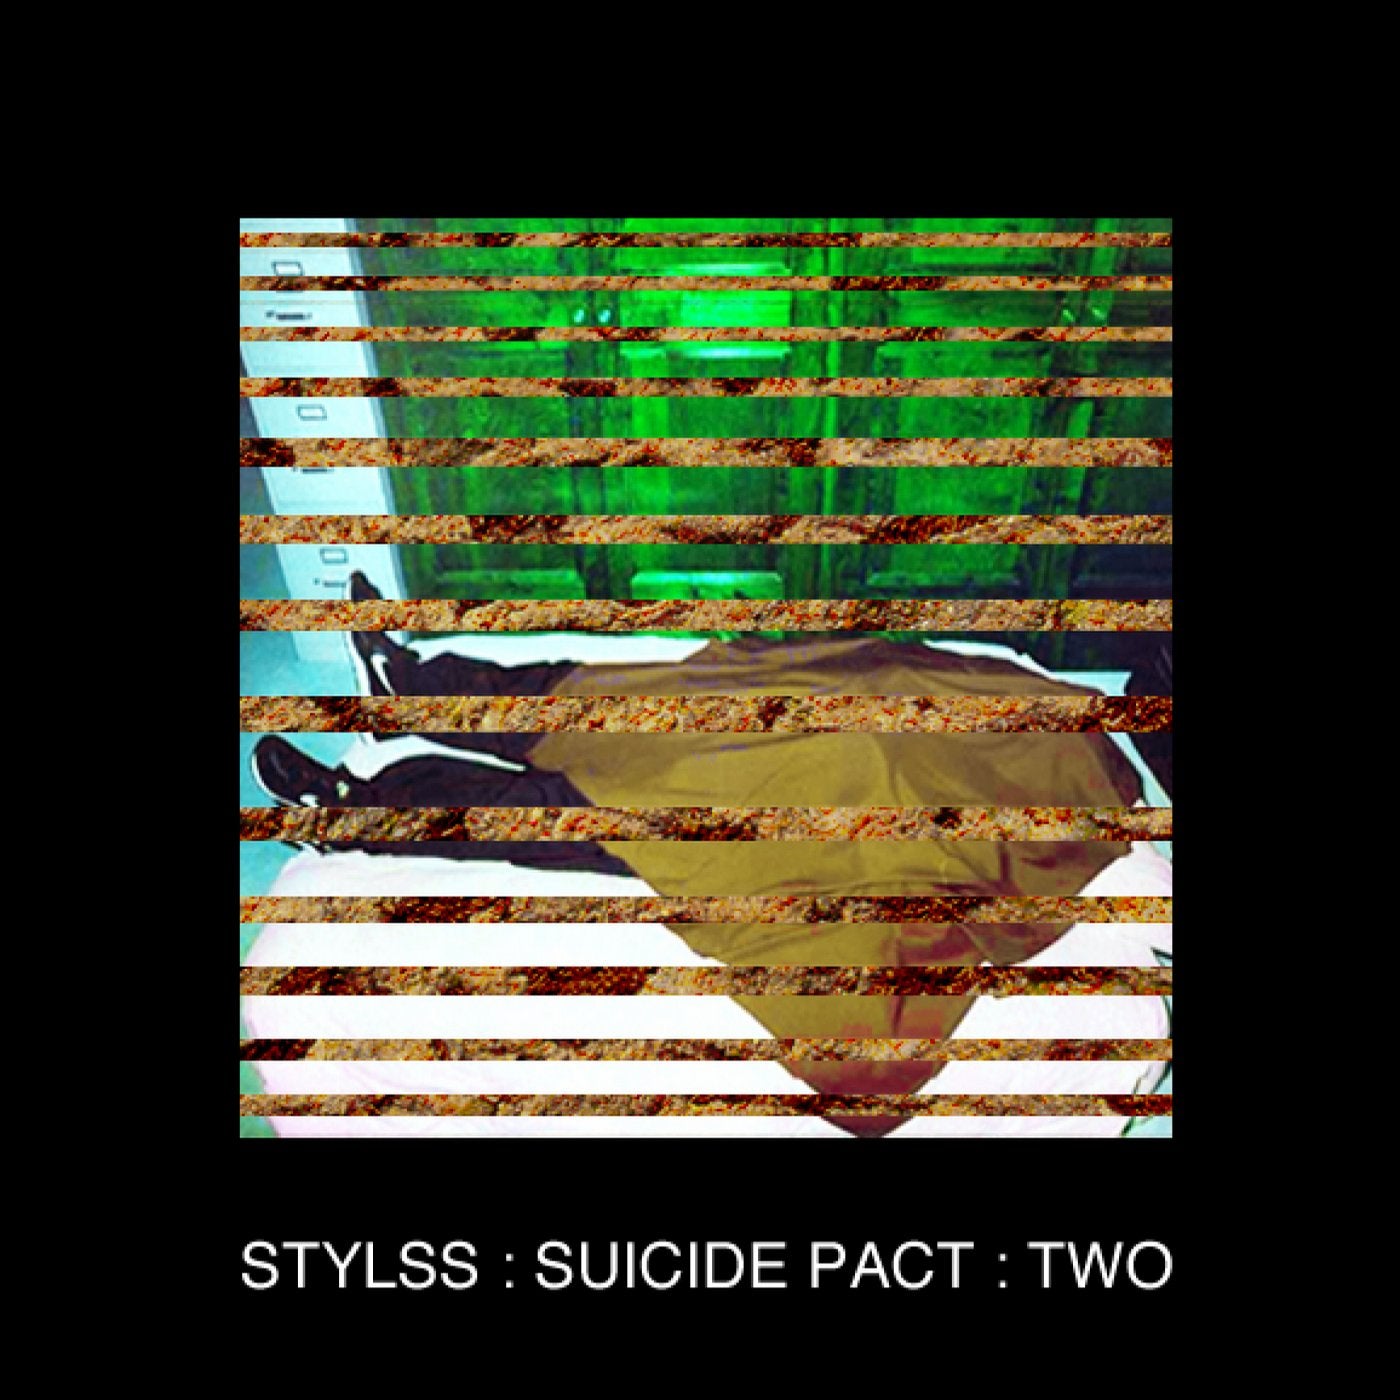 STYLSS : SUICIDE PACT : TWO